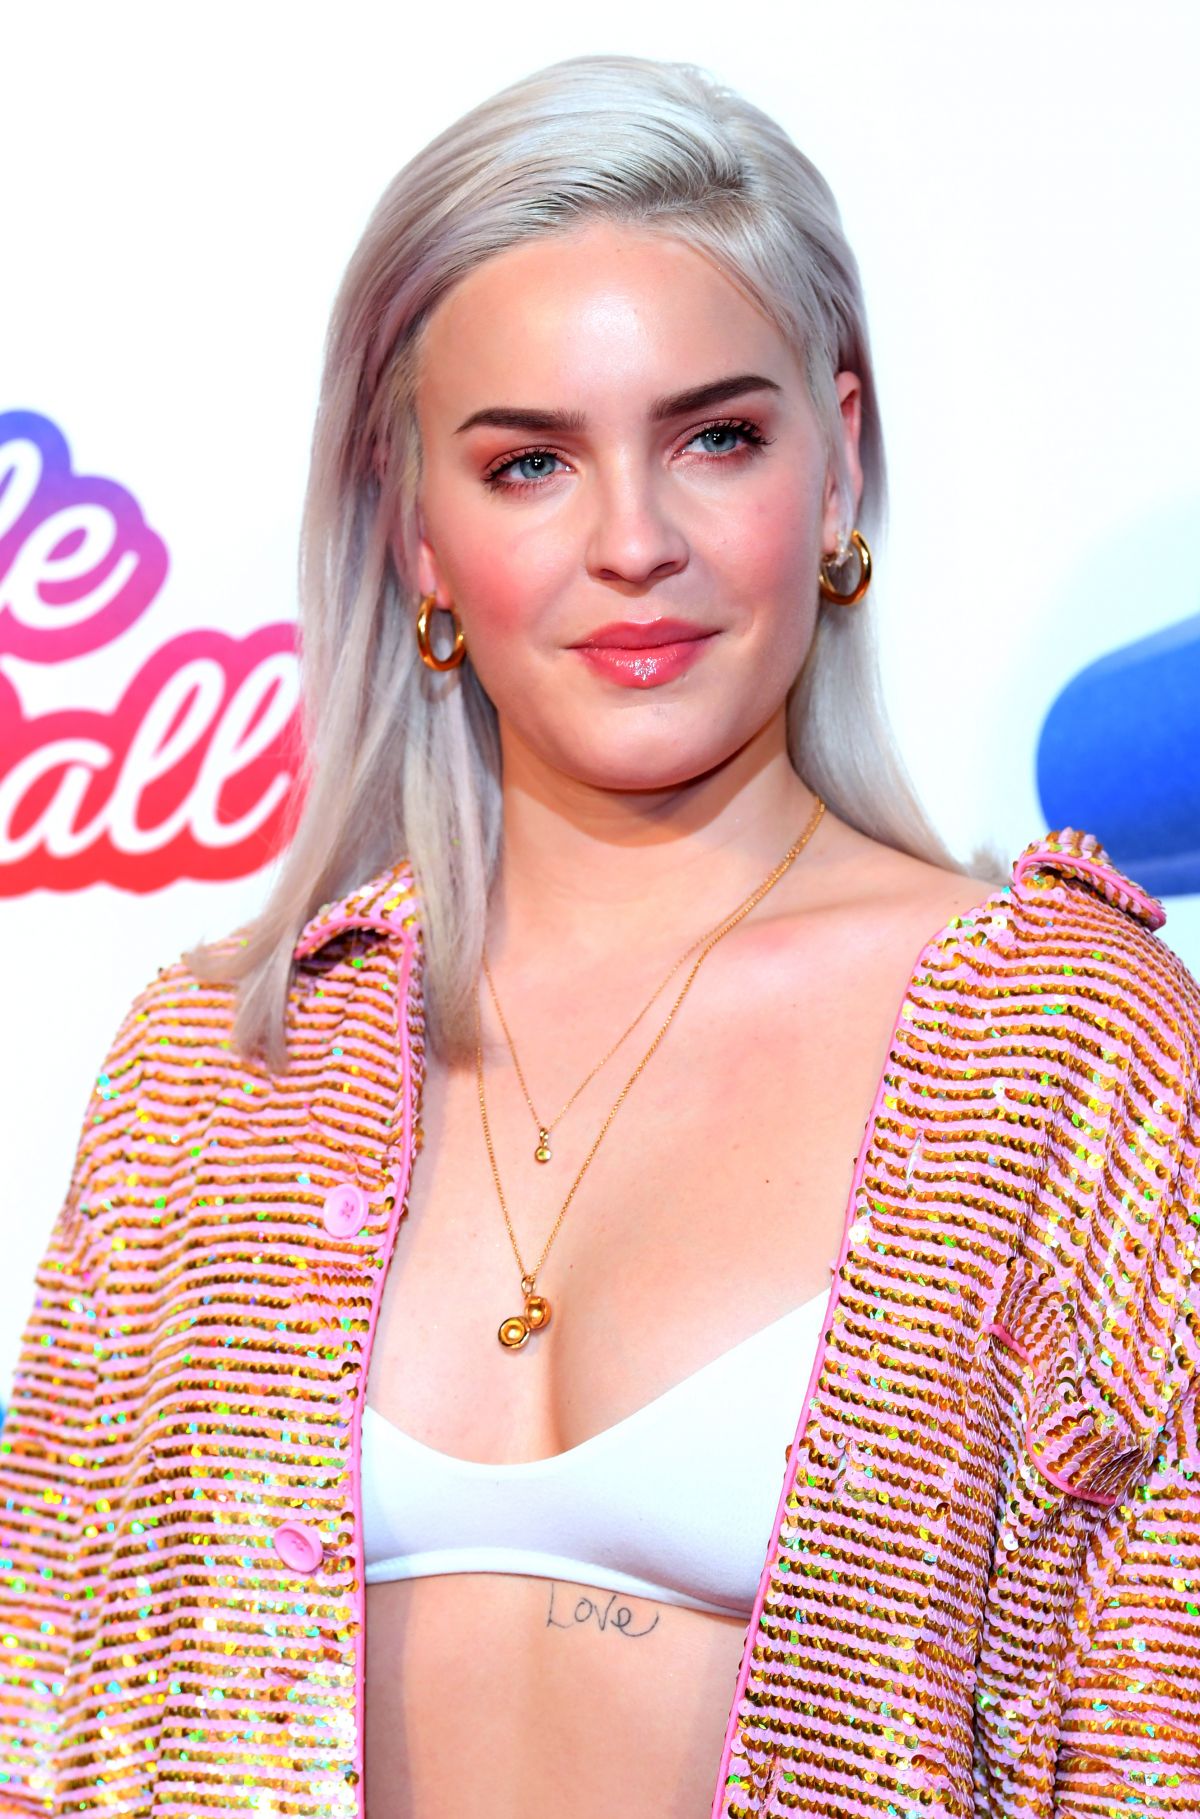 ANNE MARIE at Capital's Jingle Bell Ball at O2 Arena in London 12/09/2017 - HawtCelebs